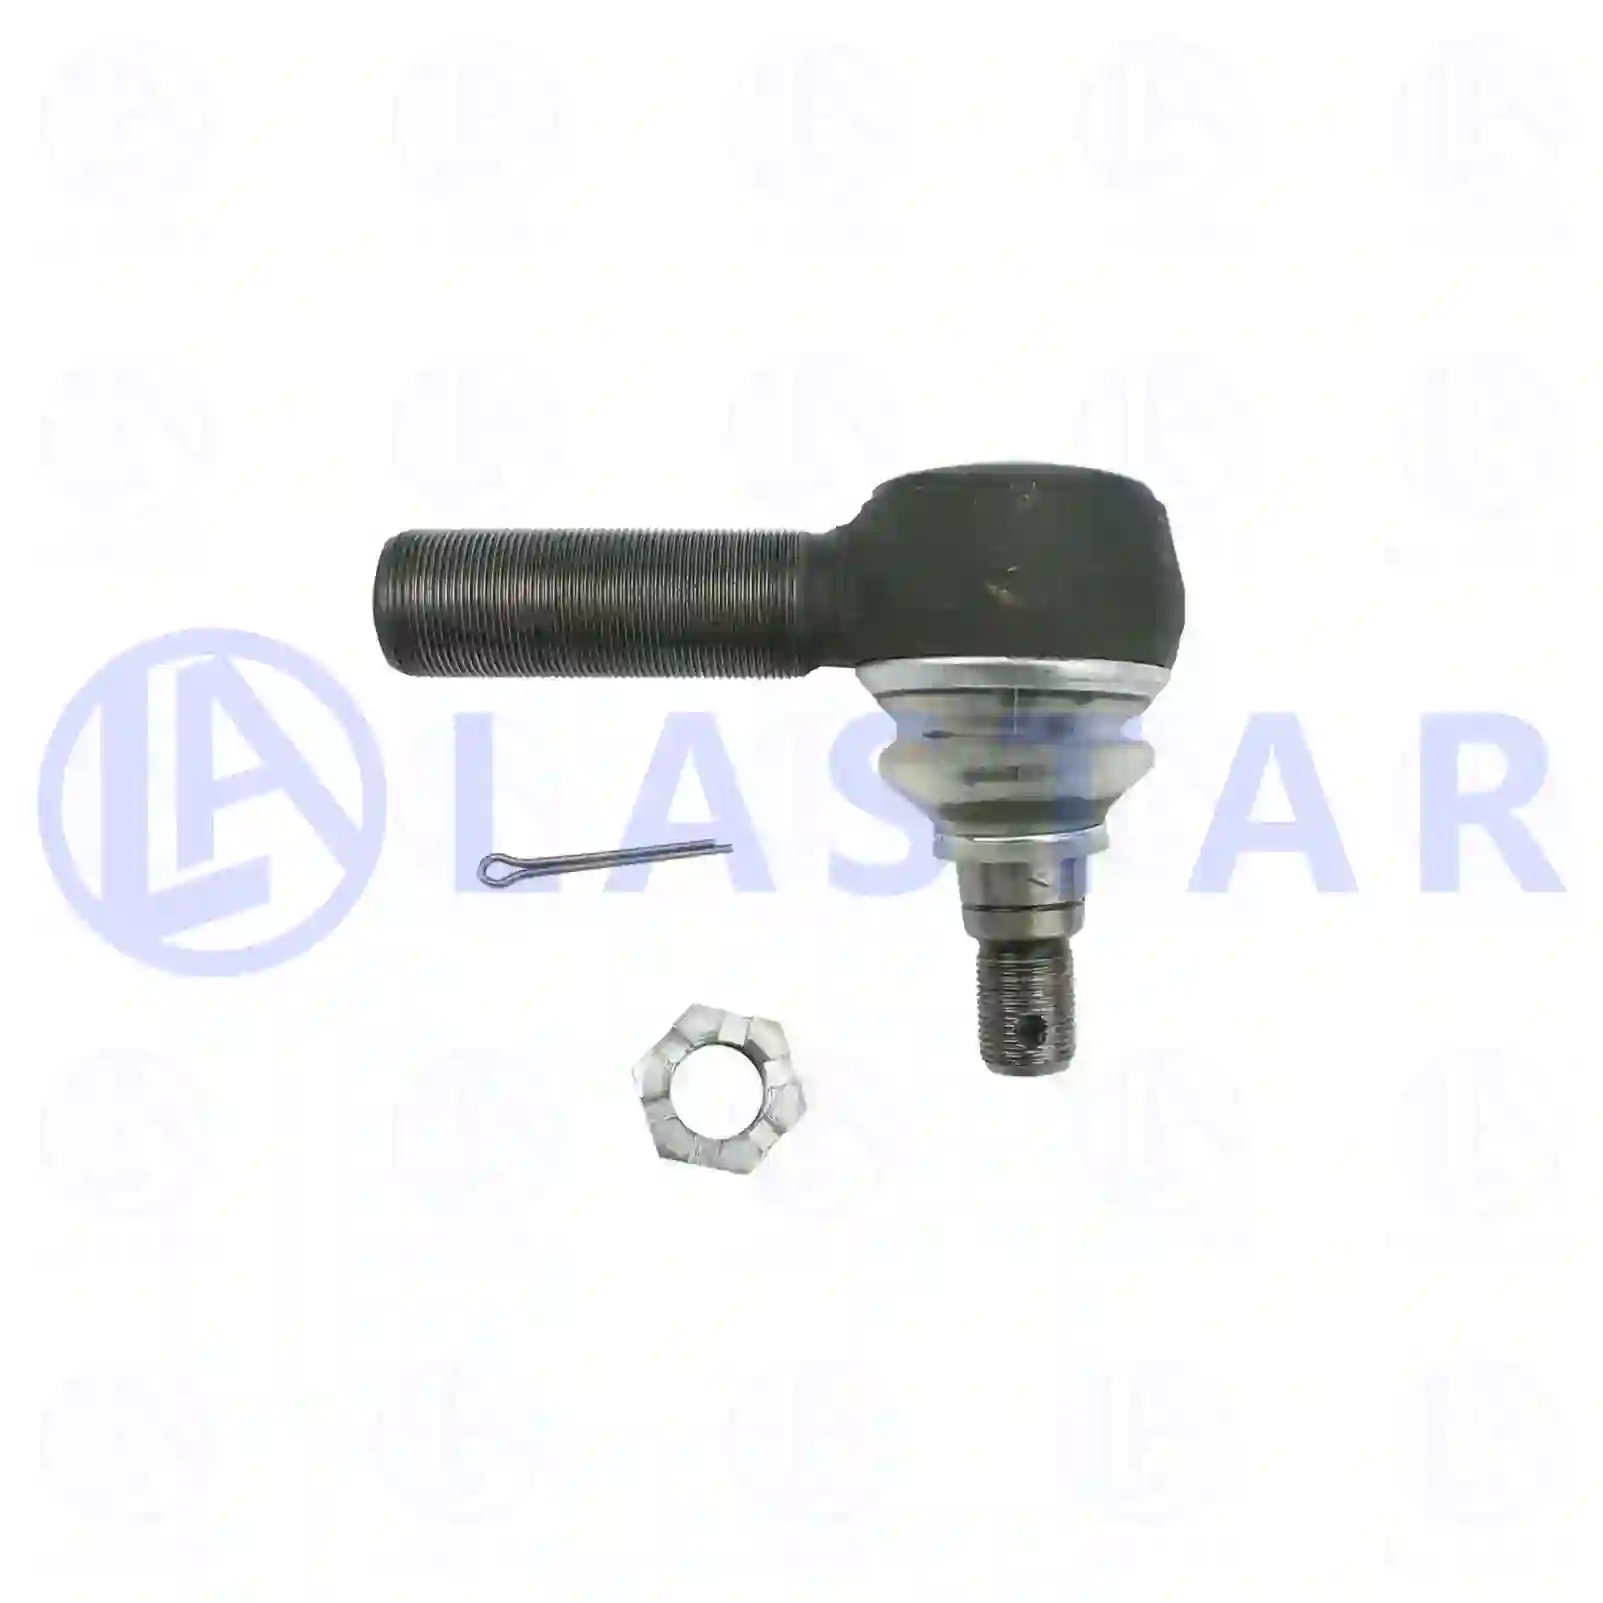 Ball joint, right hand thread, 77705143, 1505759, 1507823, 1698532, 1698846, 3090727, 3092472, 3092473, 3110002, 366758, 3988965, 6884002, 6889479, 70371282, 85114148, ZG40368-0008 ||  77705143 Lastar Spare Part | Truck Spare Parts, Auotomotive Spare Parts Ball joint, right hand thread, 77705143, 1505759, 1507823, 1698532, 1698846, 3090727, 3092472, 3092473, 3110002, 366758, 3988965, 6884002, 6889479, 70371282, 85114148, ZG40368-0008 ||  77705143 Lastar Spare Part | Truck Spare Parts, Auotomotive Spare Parts